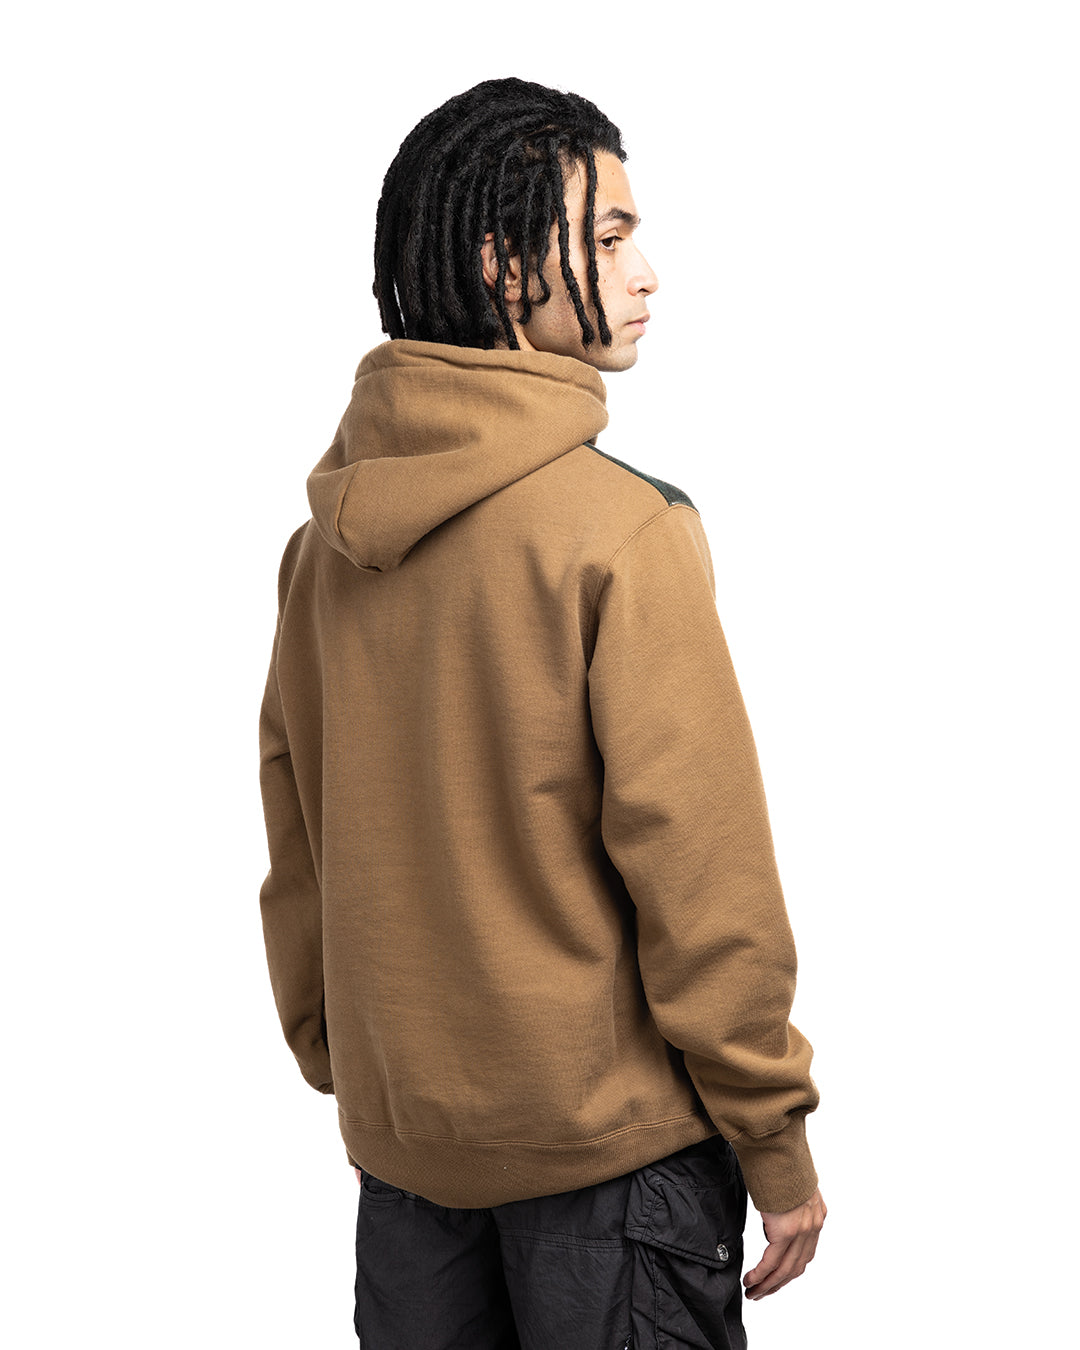 Undercover x Markus Arkesson UC2A4802-2 Hoodie Brown